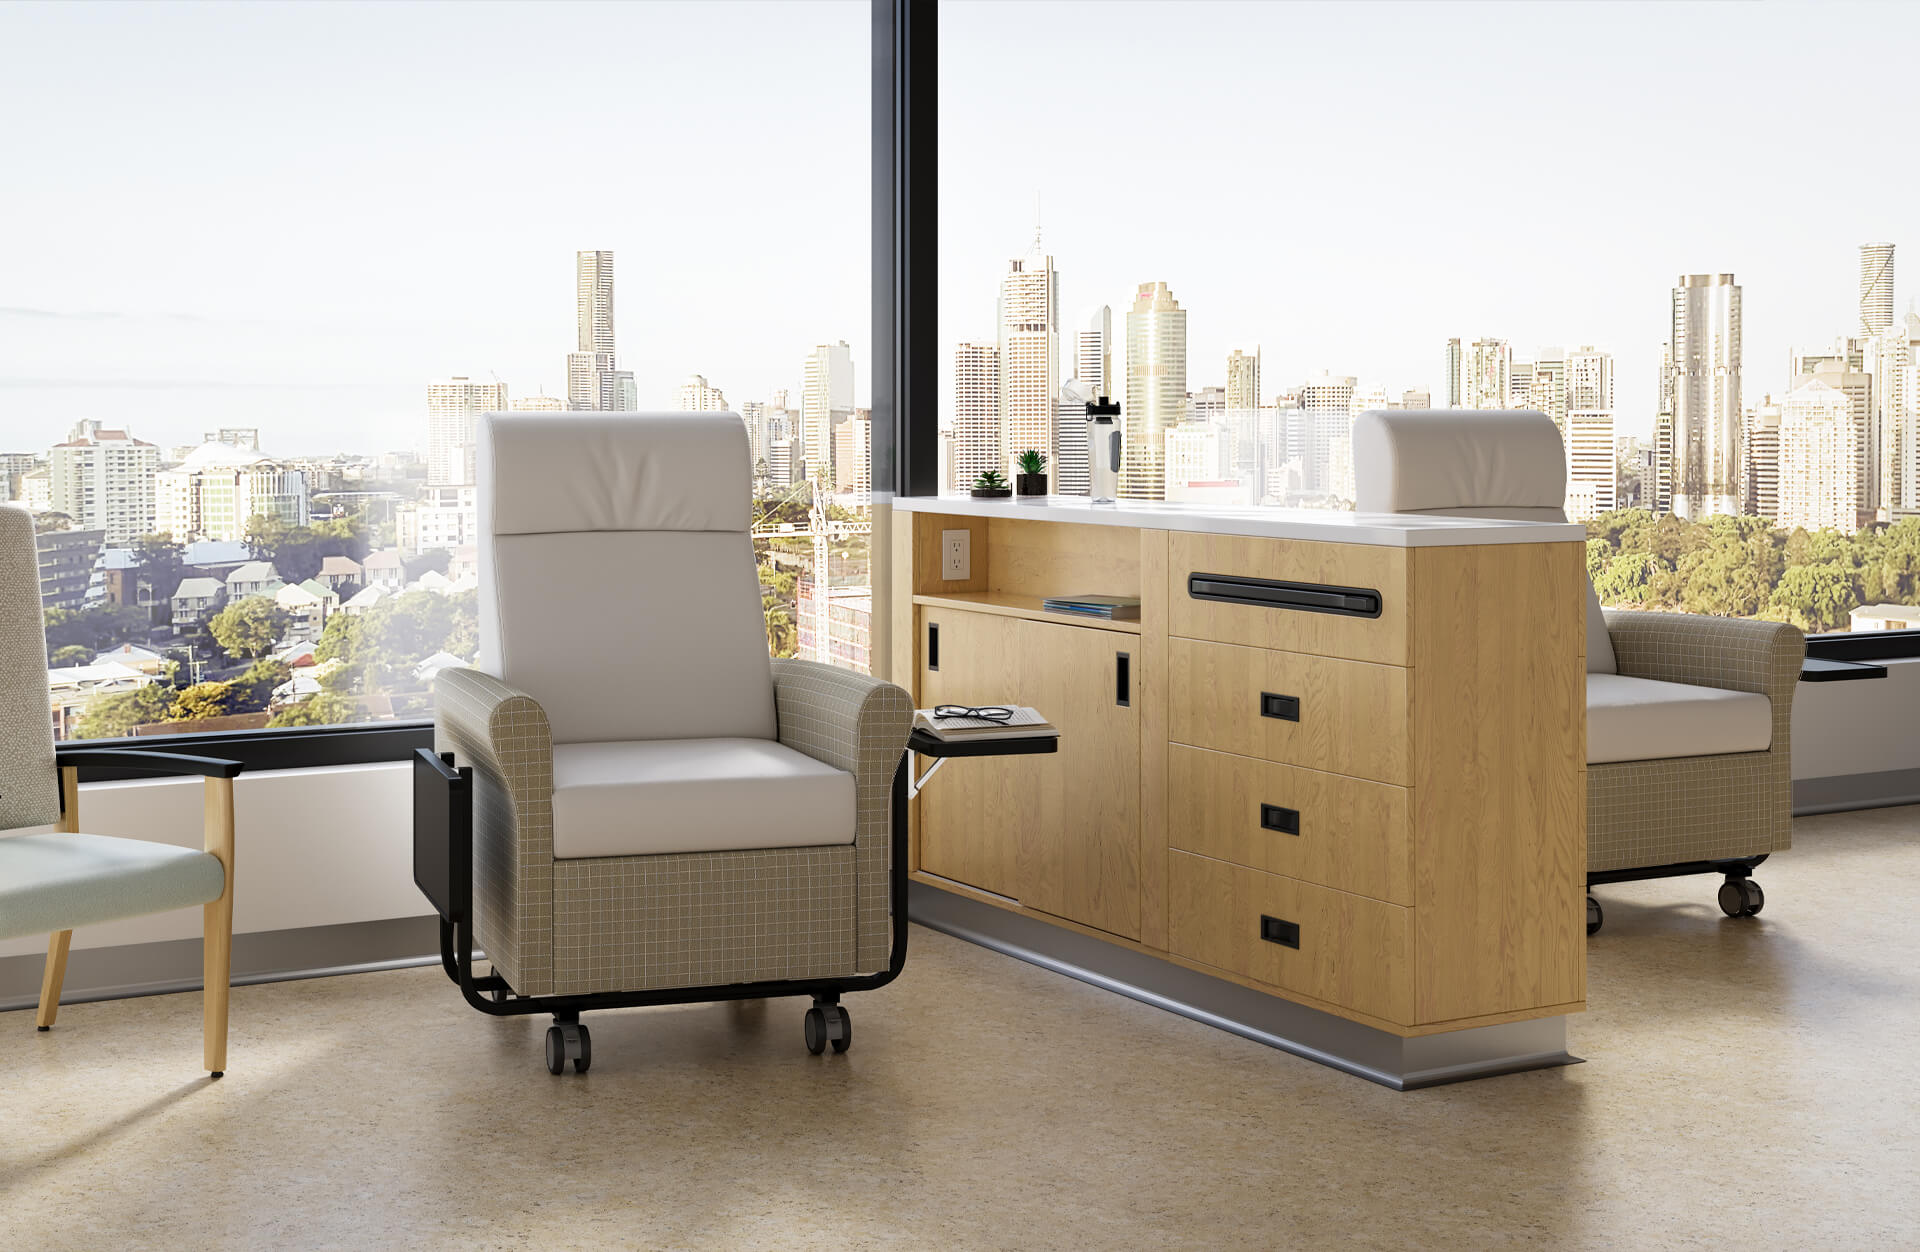 Hospital Chair Lifestyle 3D Rendering